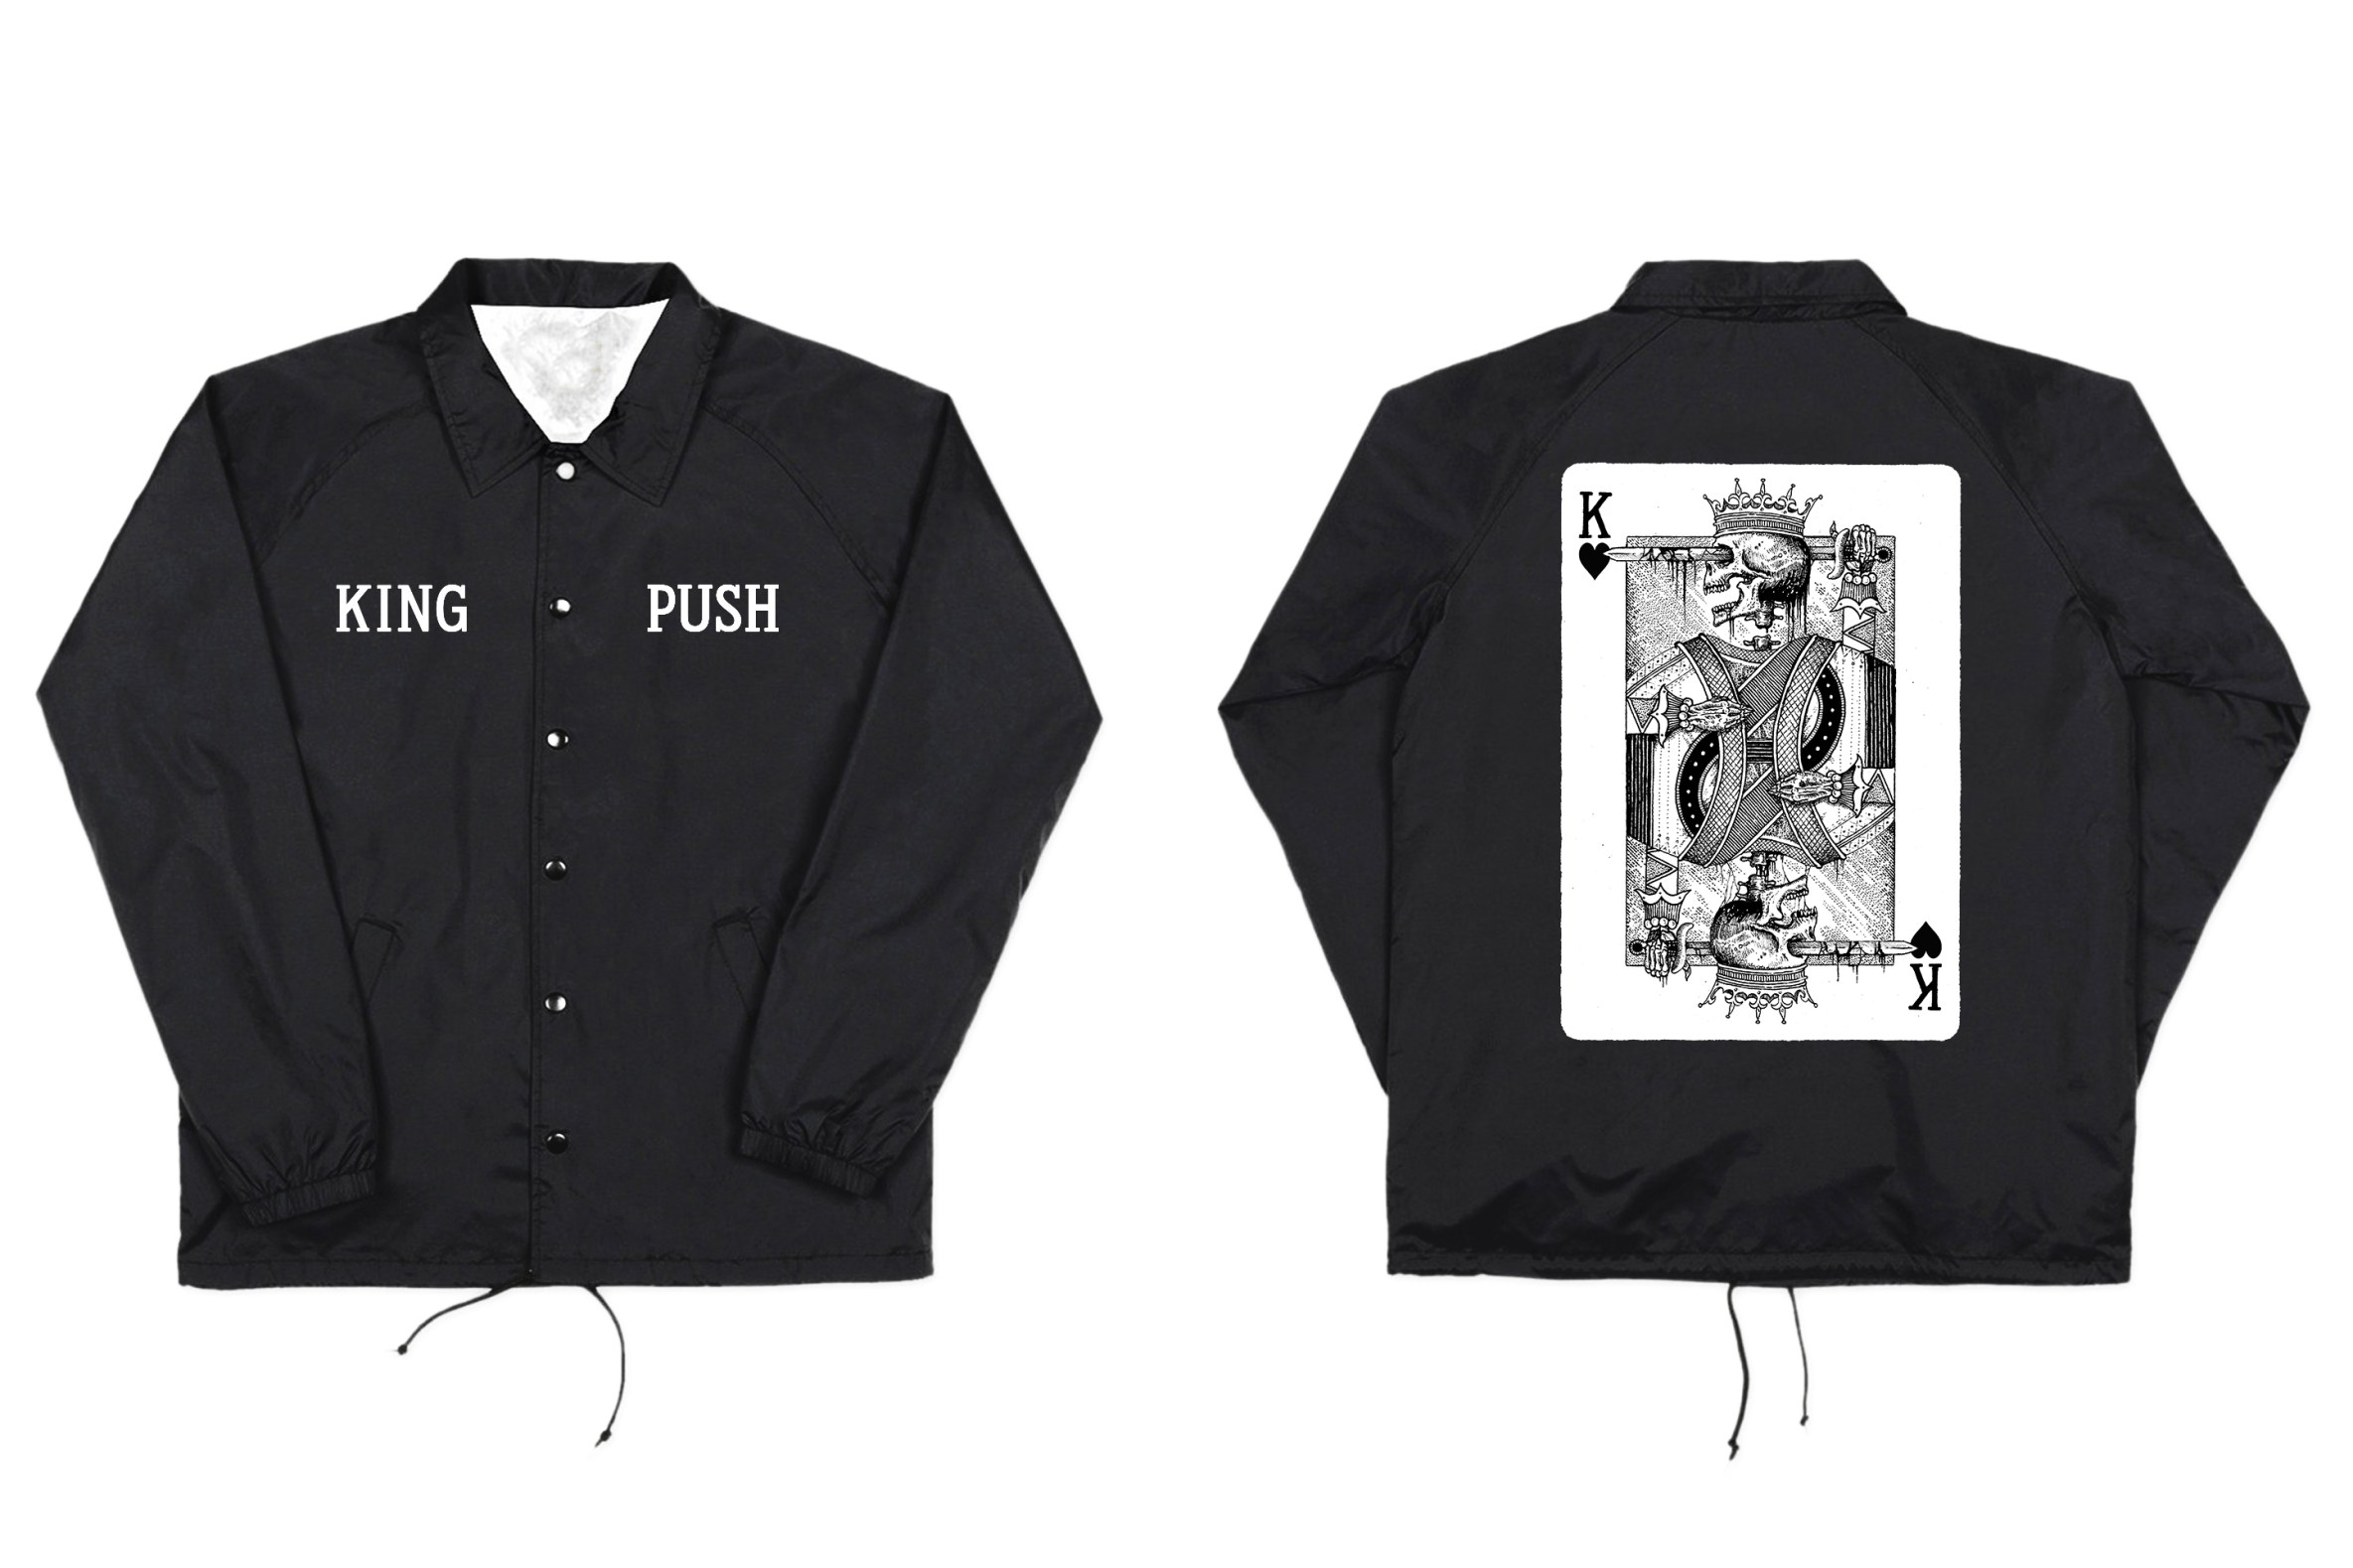 Pusha T 2016 Collection: Official Photos Revealed